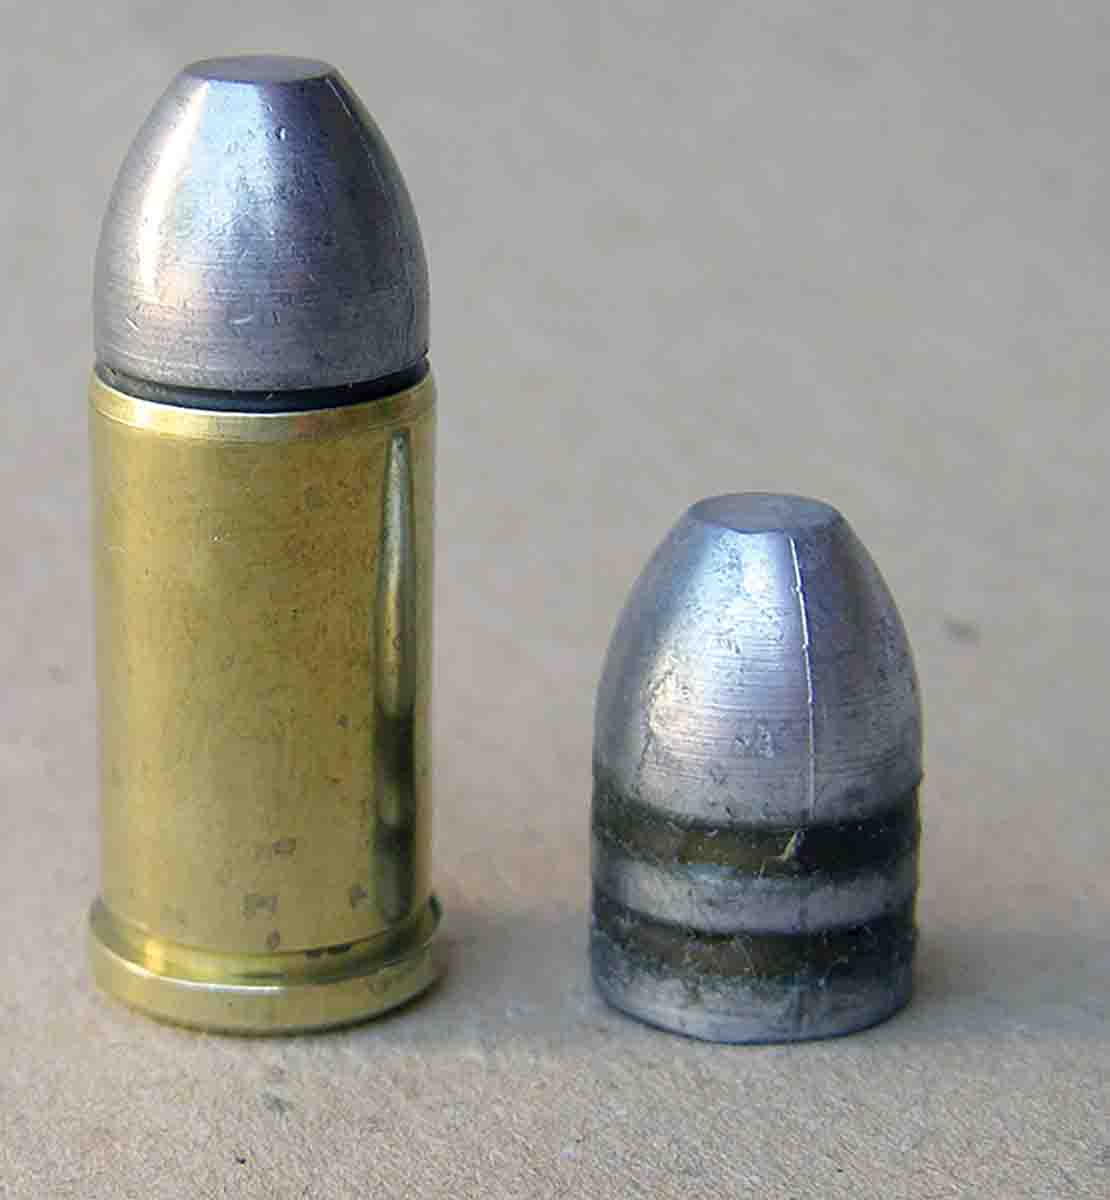 This 260-grain cast bullet from Lyman mould 454190 gave excellent accuracy, but it is crucial to seat it to the correct overall length to keep pressures in check.